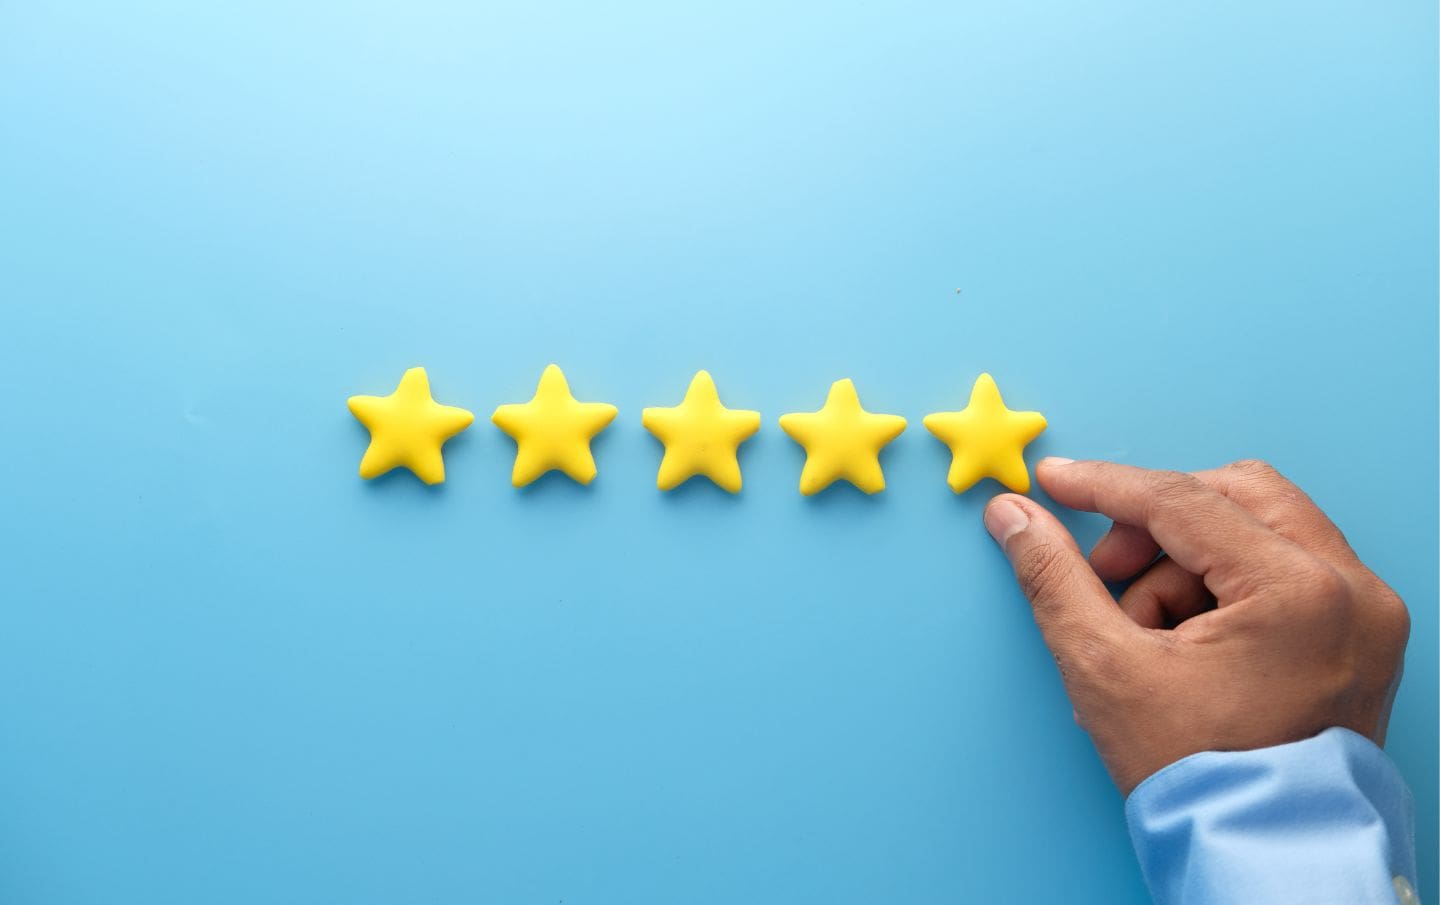 A business owner organising his five stars from his customer's reviews to leverage and boost business reputation and sales